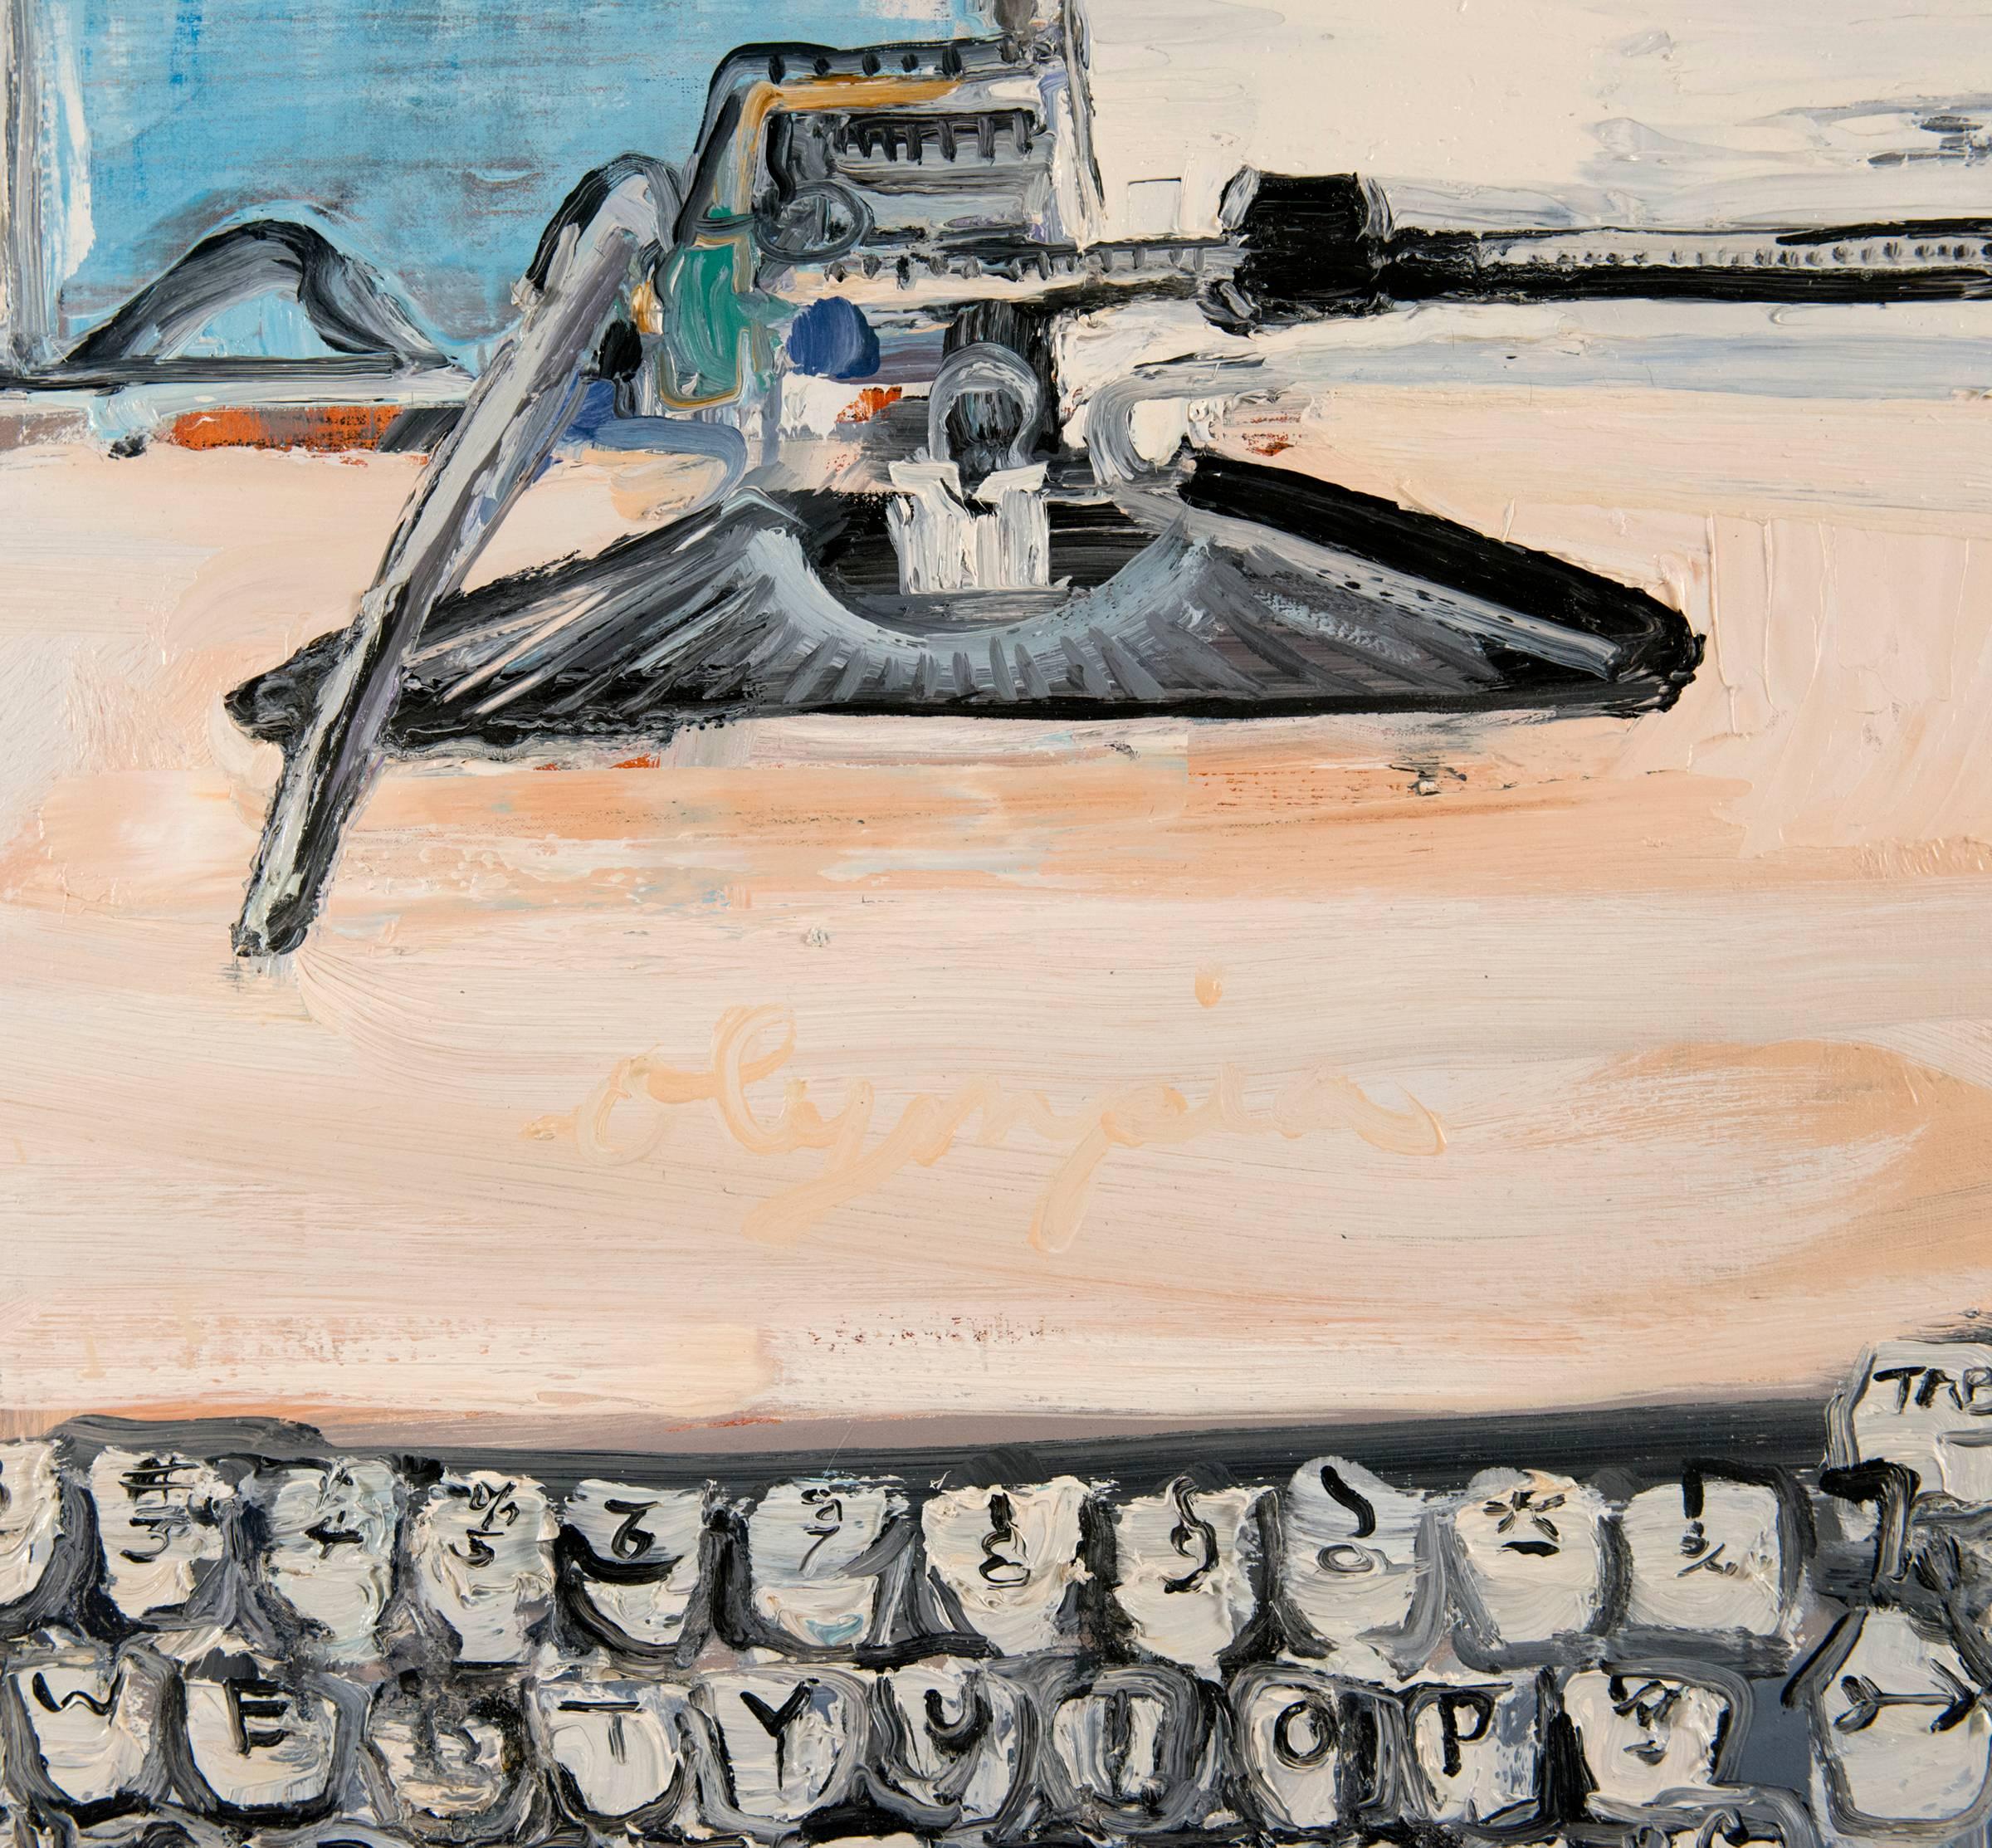 Modern Typewriter - Abstract Expressionist Painting by Sam Messer